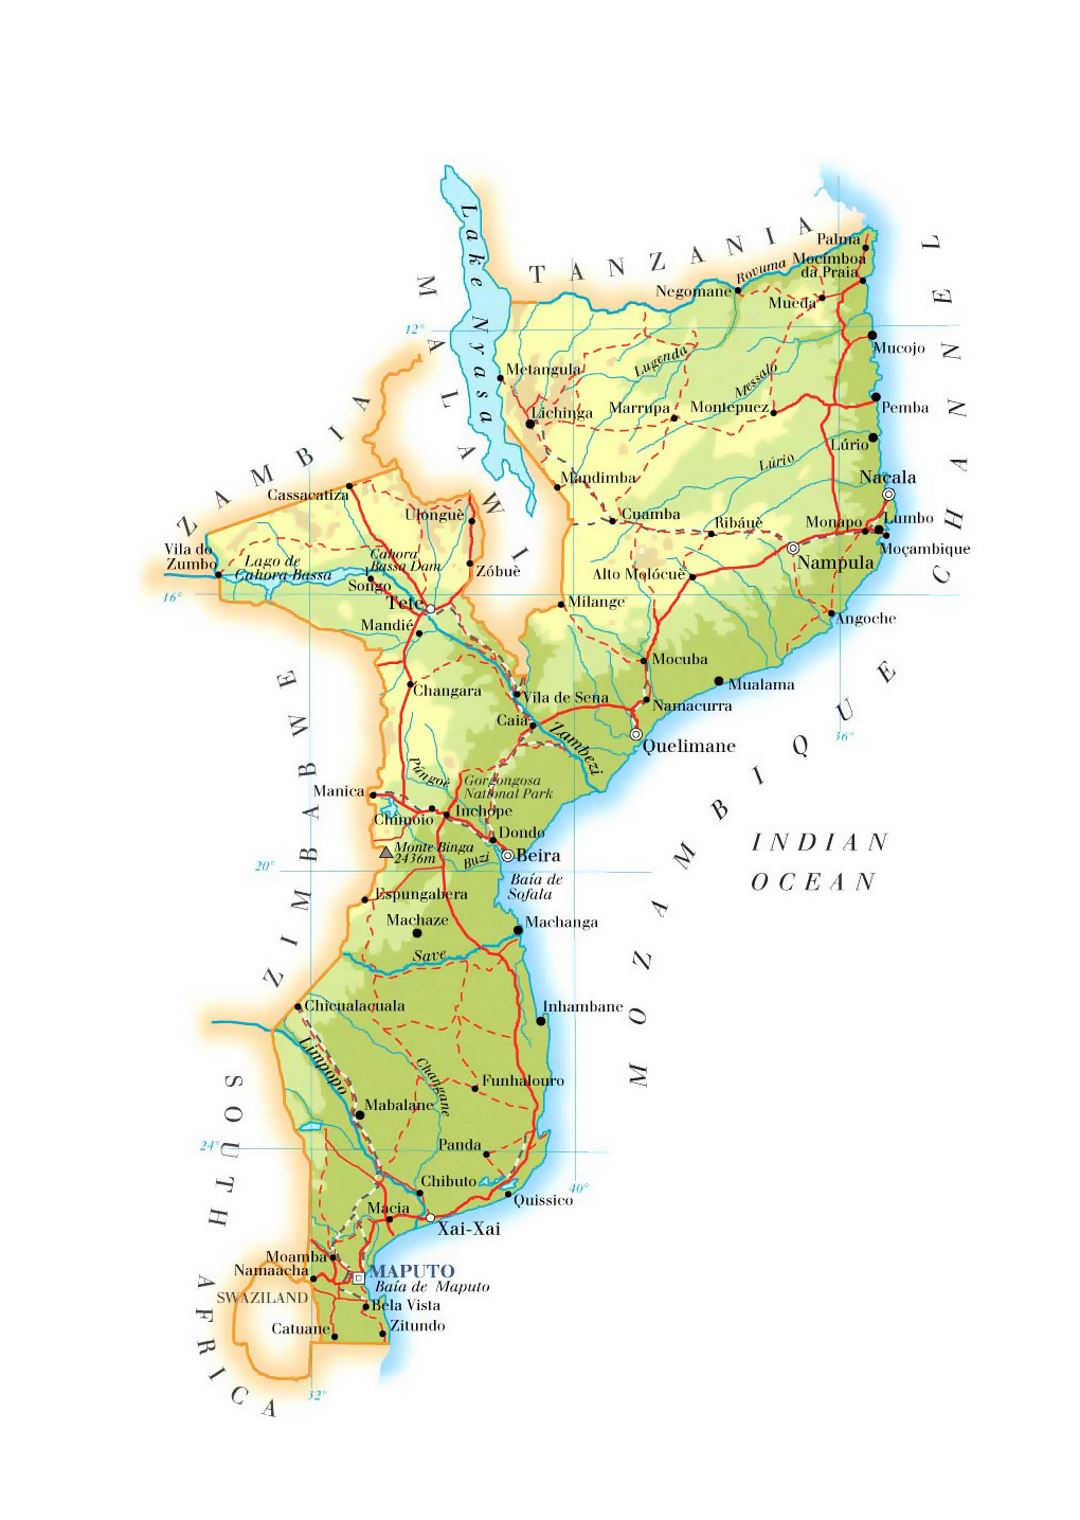 Detailed elevation map of Mozambique with roads, railroads, cities and airports